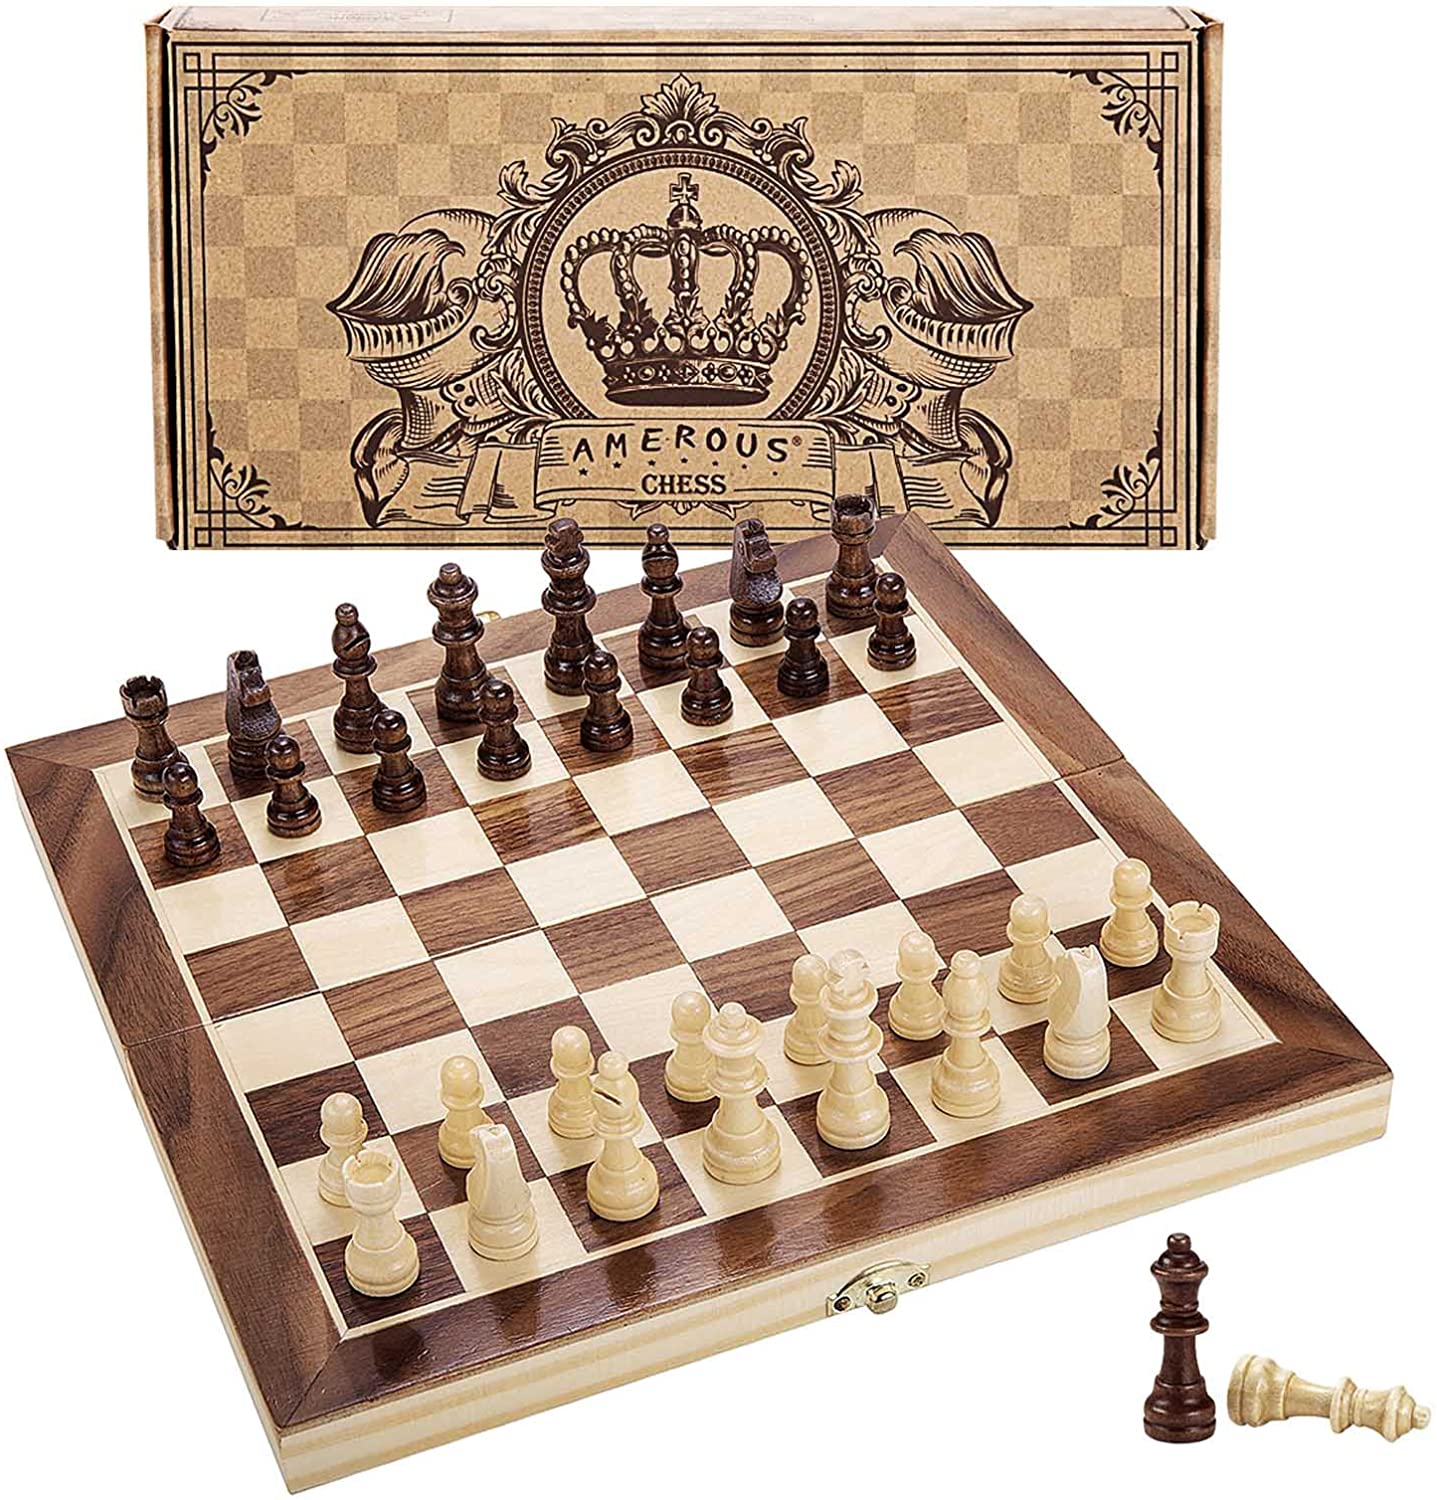 Travel Chess Folding Wooden Chess Set Portable Travel Wooden Board Games Chess Set for Adults and Kids for Party Family Activities 